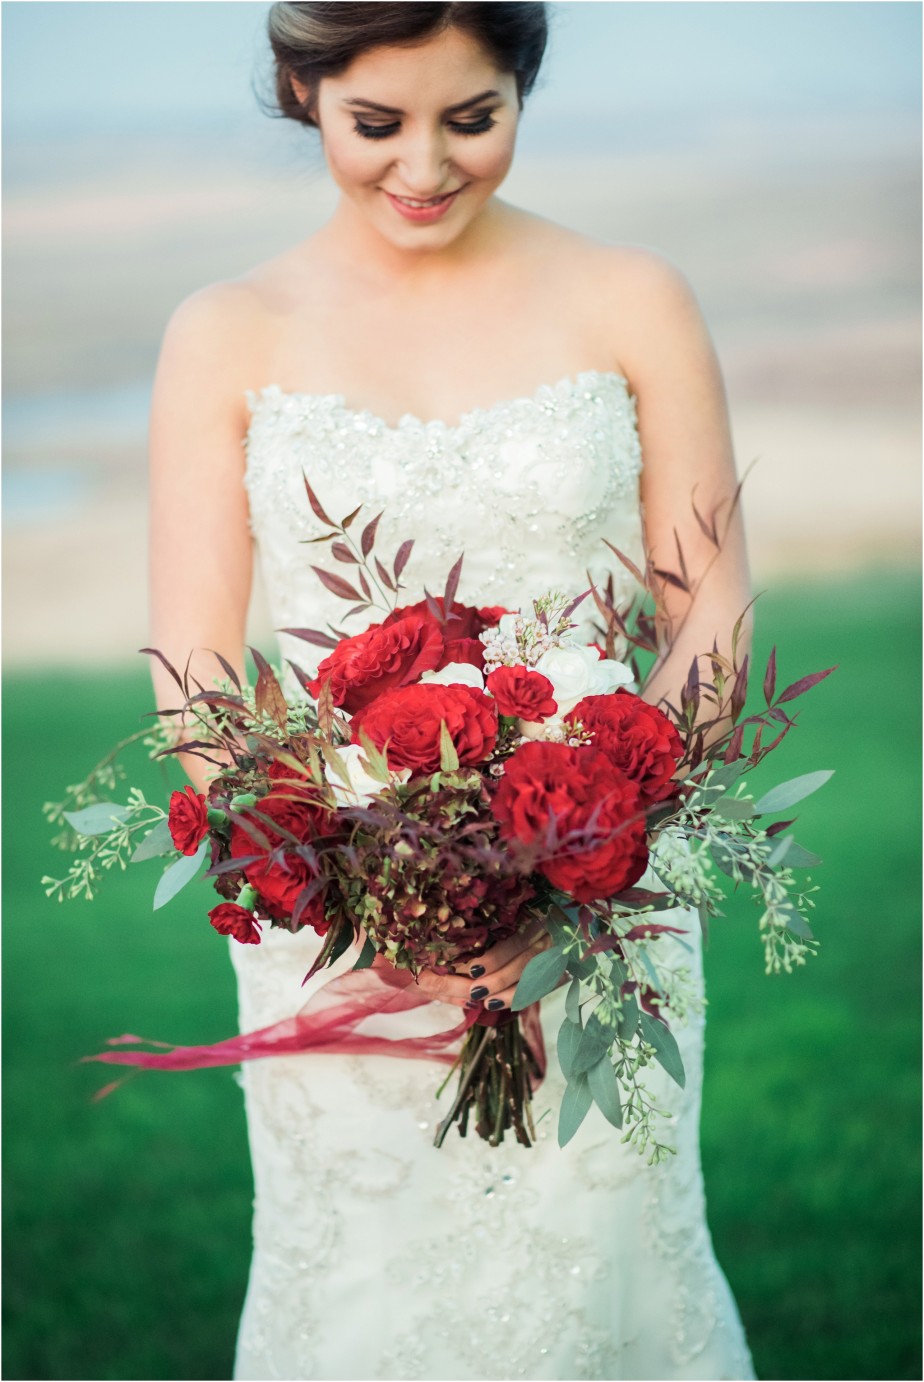 Eagle Lakes Lodge Wedding Inspiration Shoot bride and with bridal bouquet photo